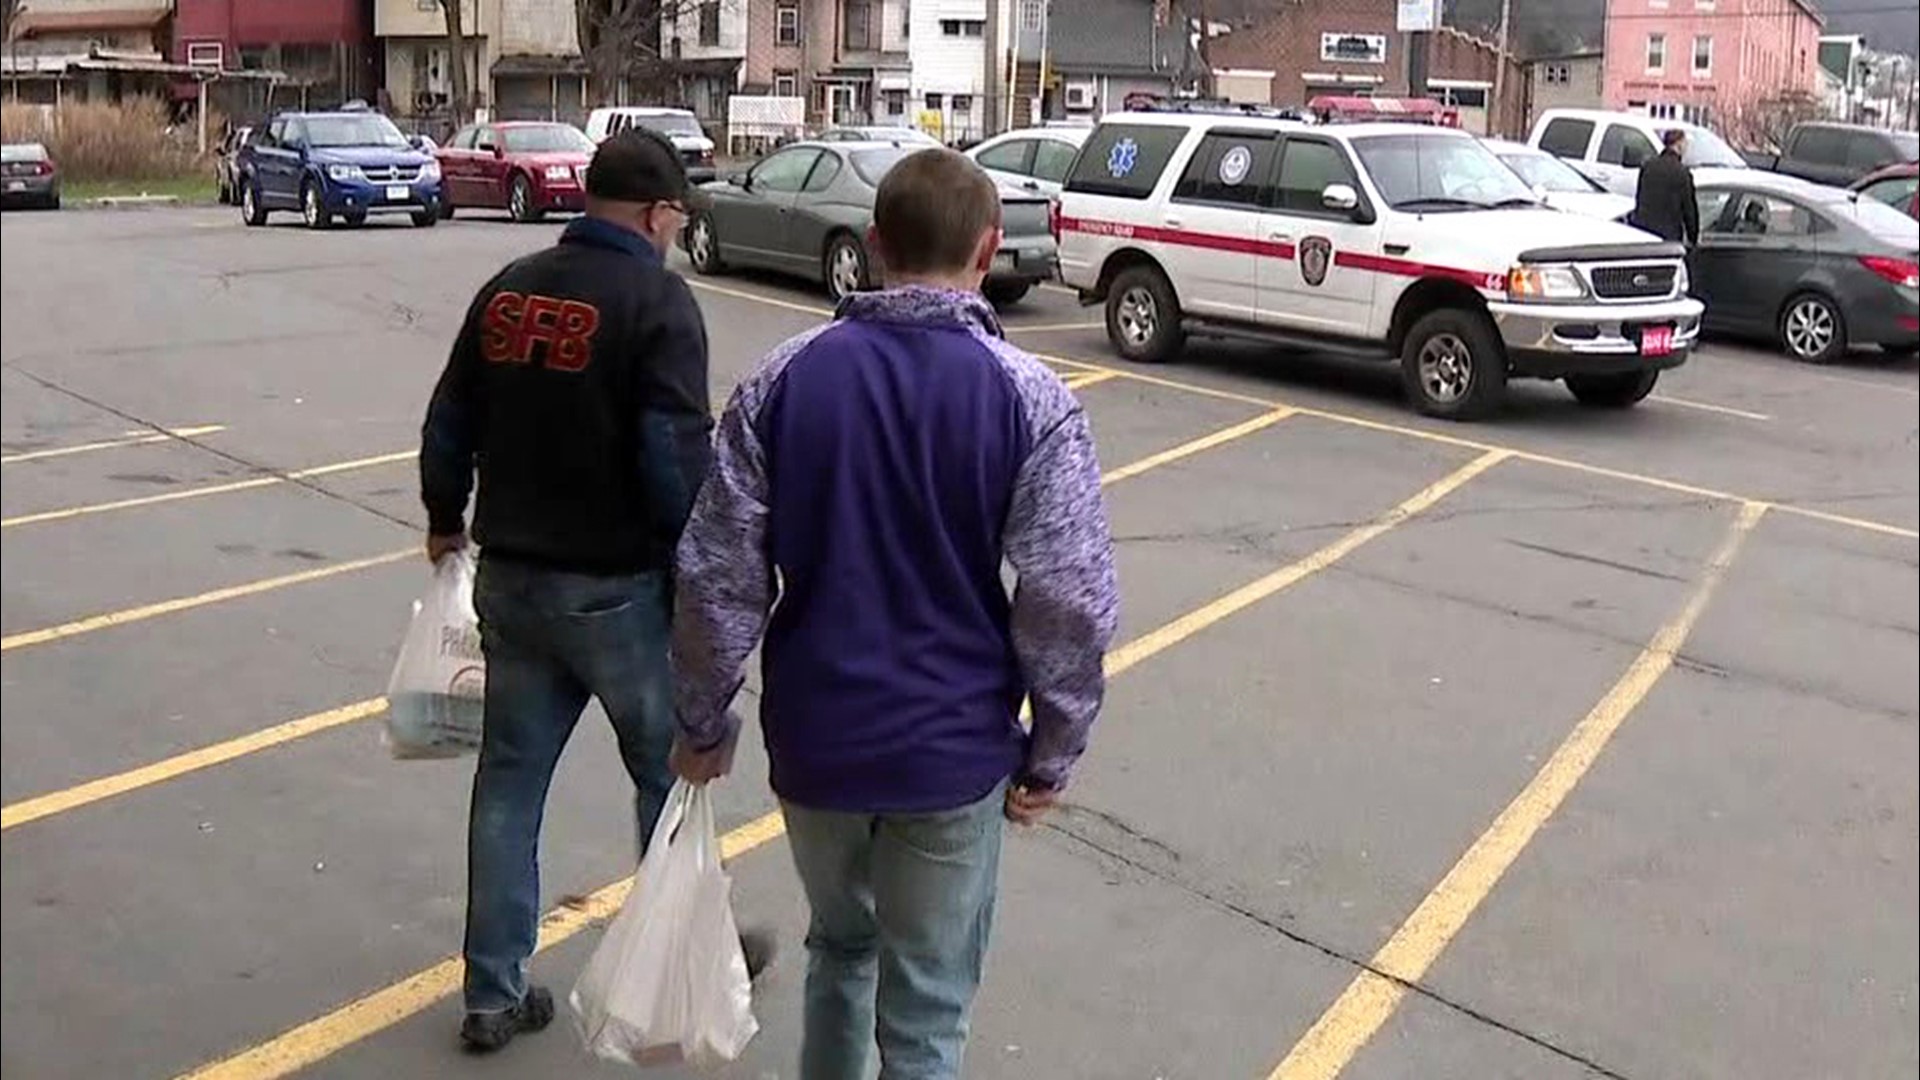 When firefighters in Shamokin aren't running into burning buildings lately, they are grocery shopping.